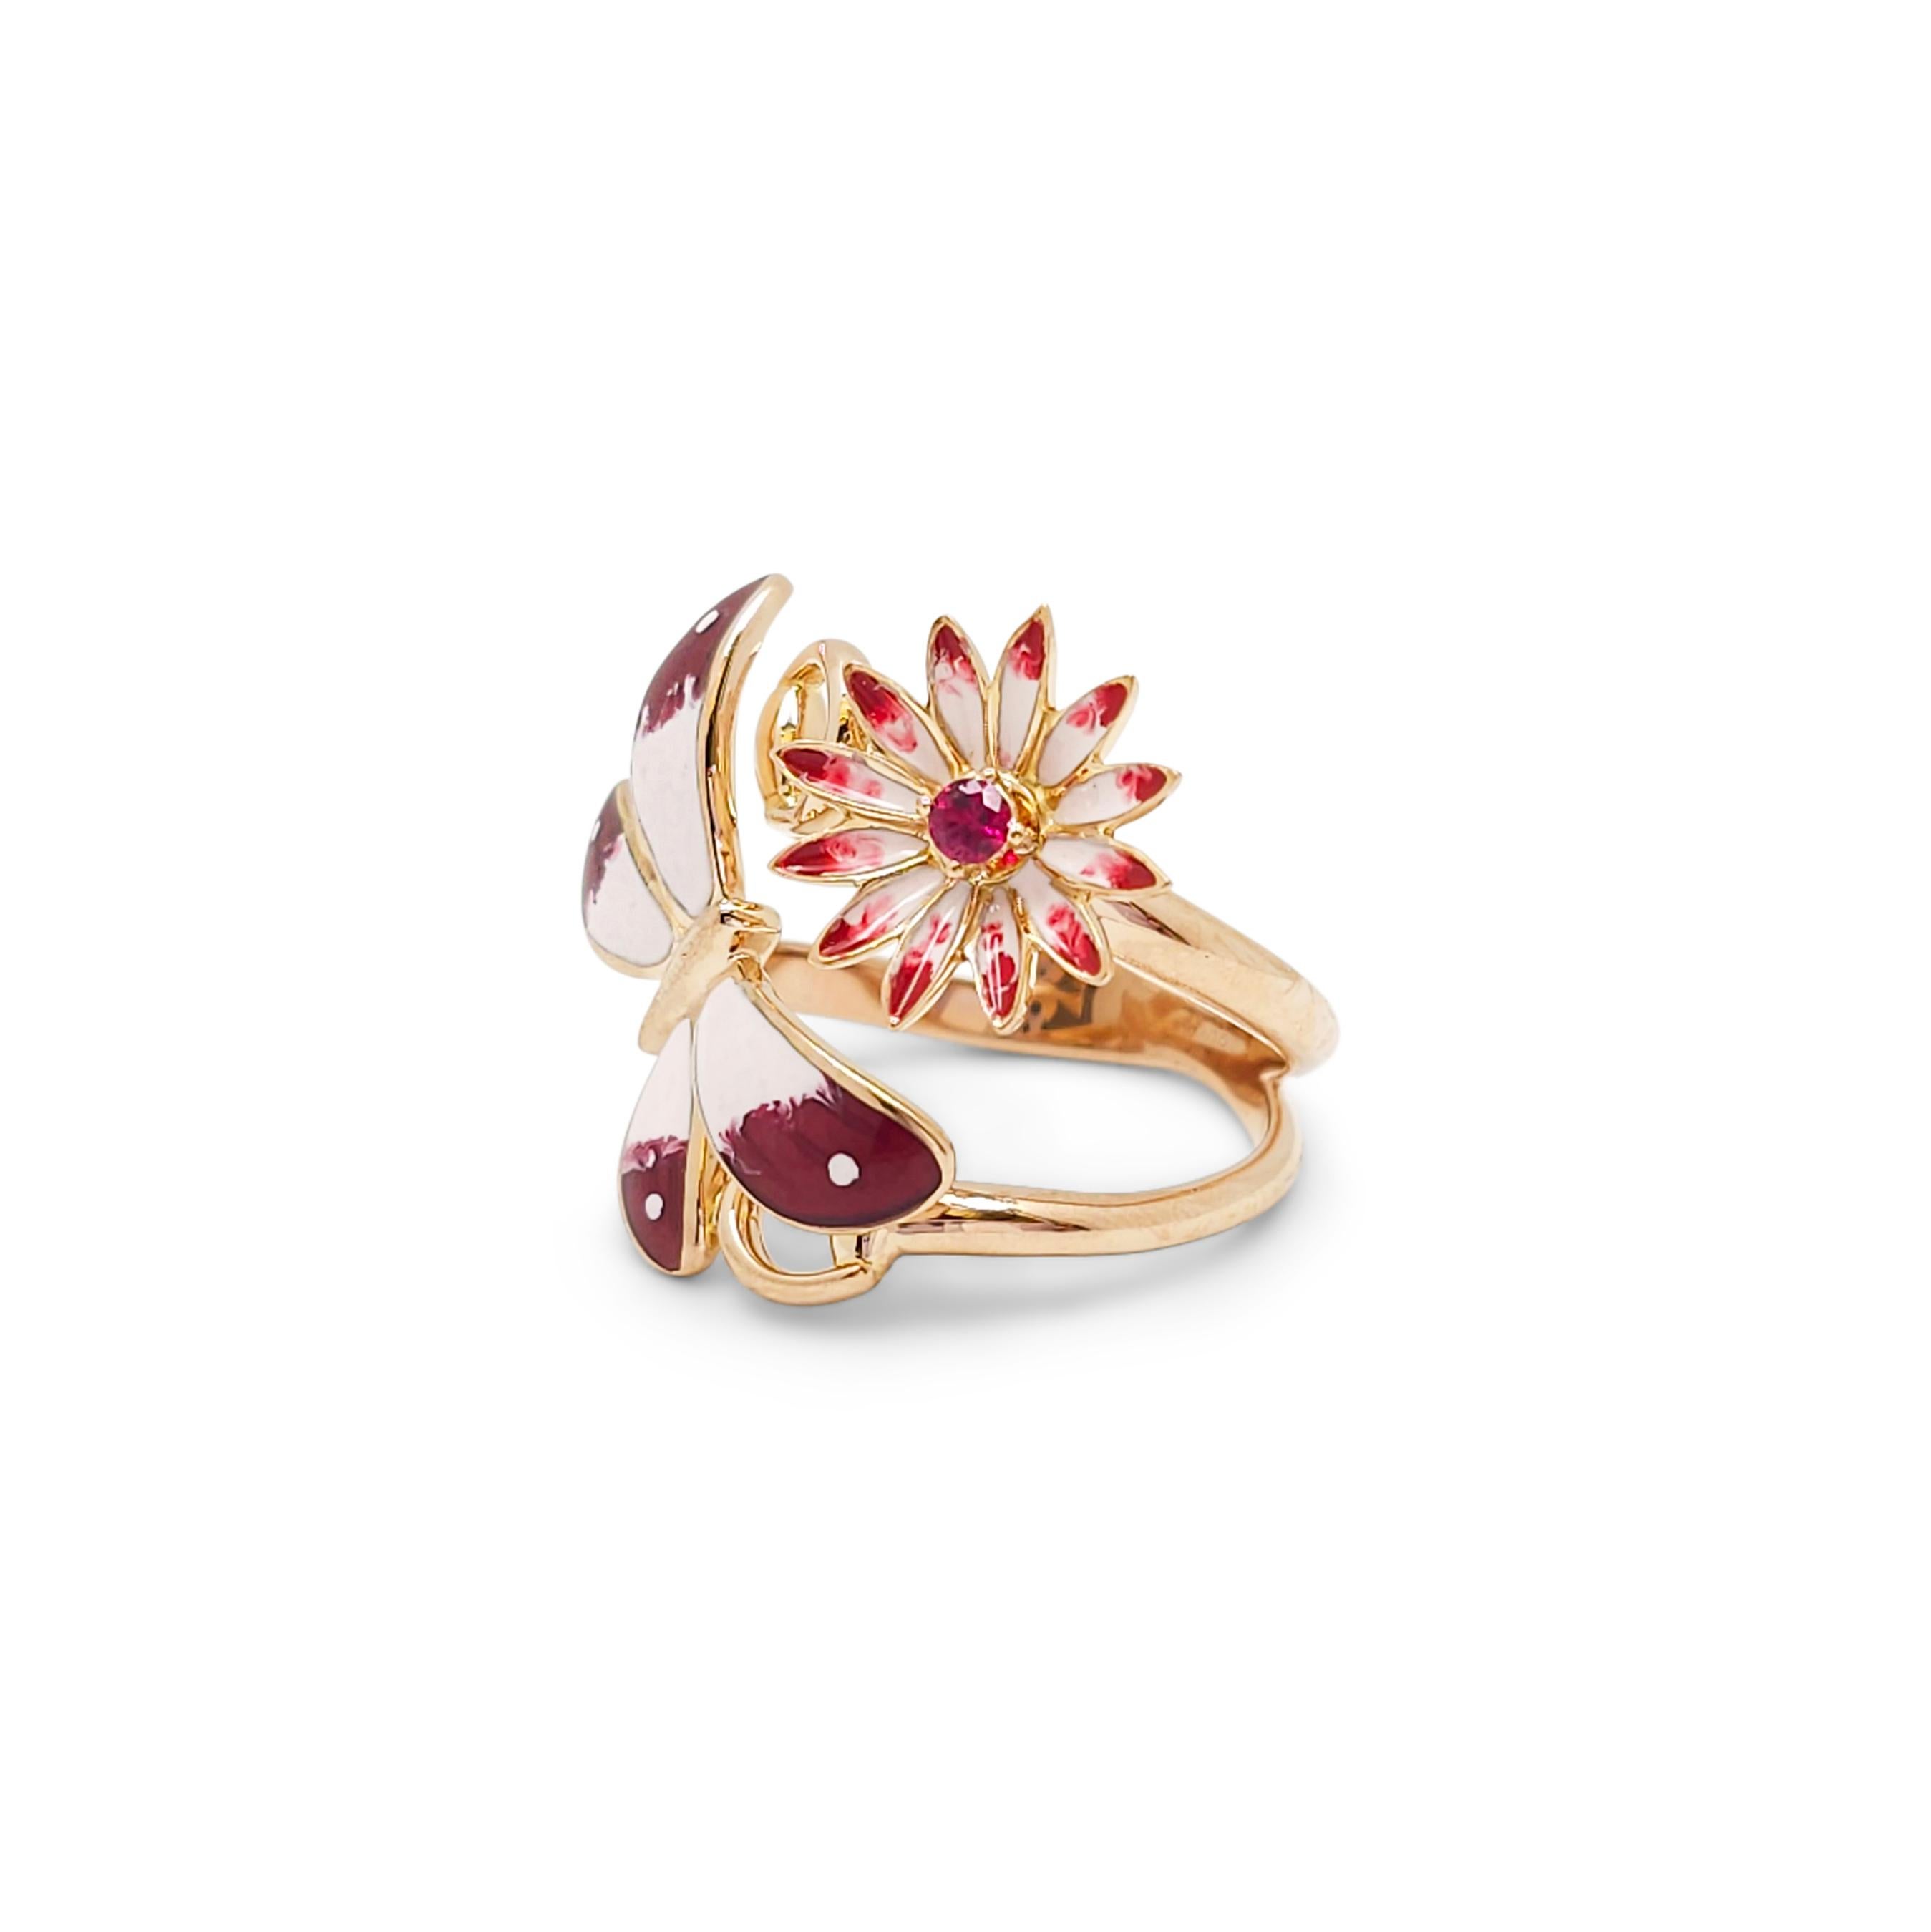 Authentic Gucci Flora butterfly ring crafted in 18 karat rose gold.  The effervescent design features an enamel butterfly and flower studded with a bezel-set ruby center, mounted on the iconic Gucci horse bit motif.  Size 13 (US 6 1/4, EU 53). 